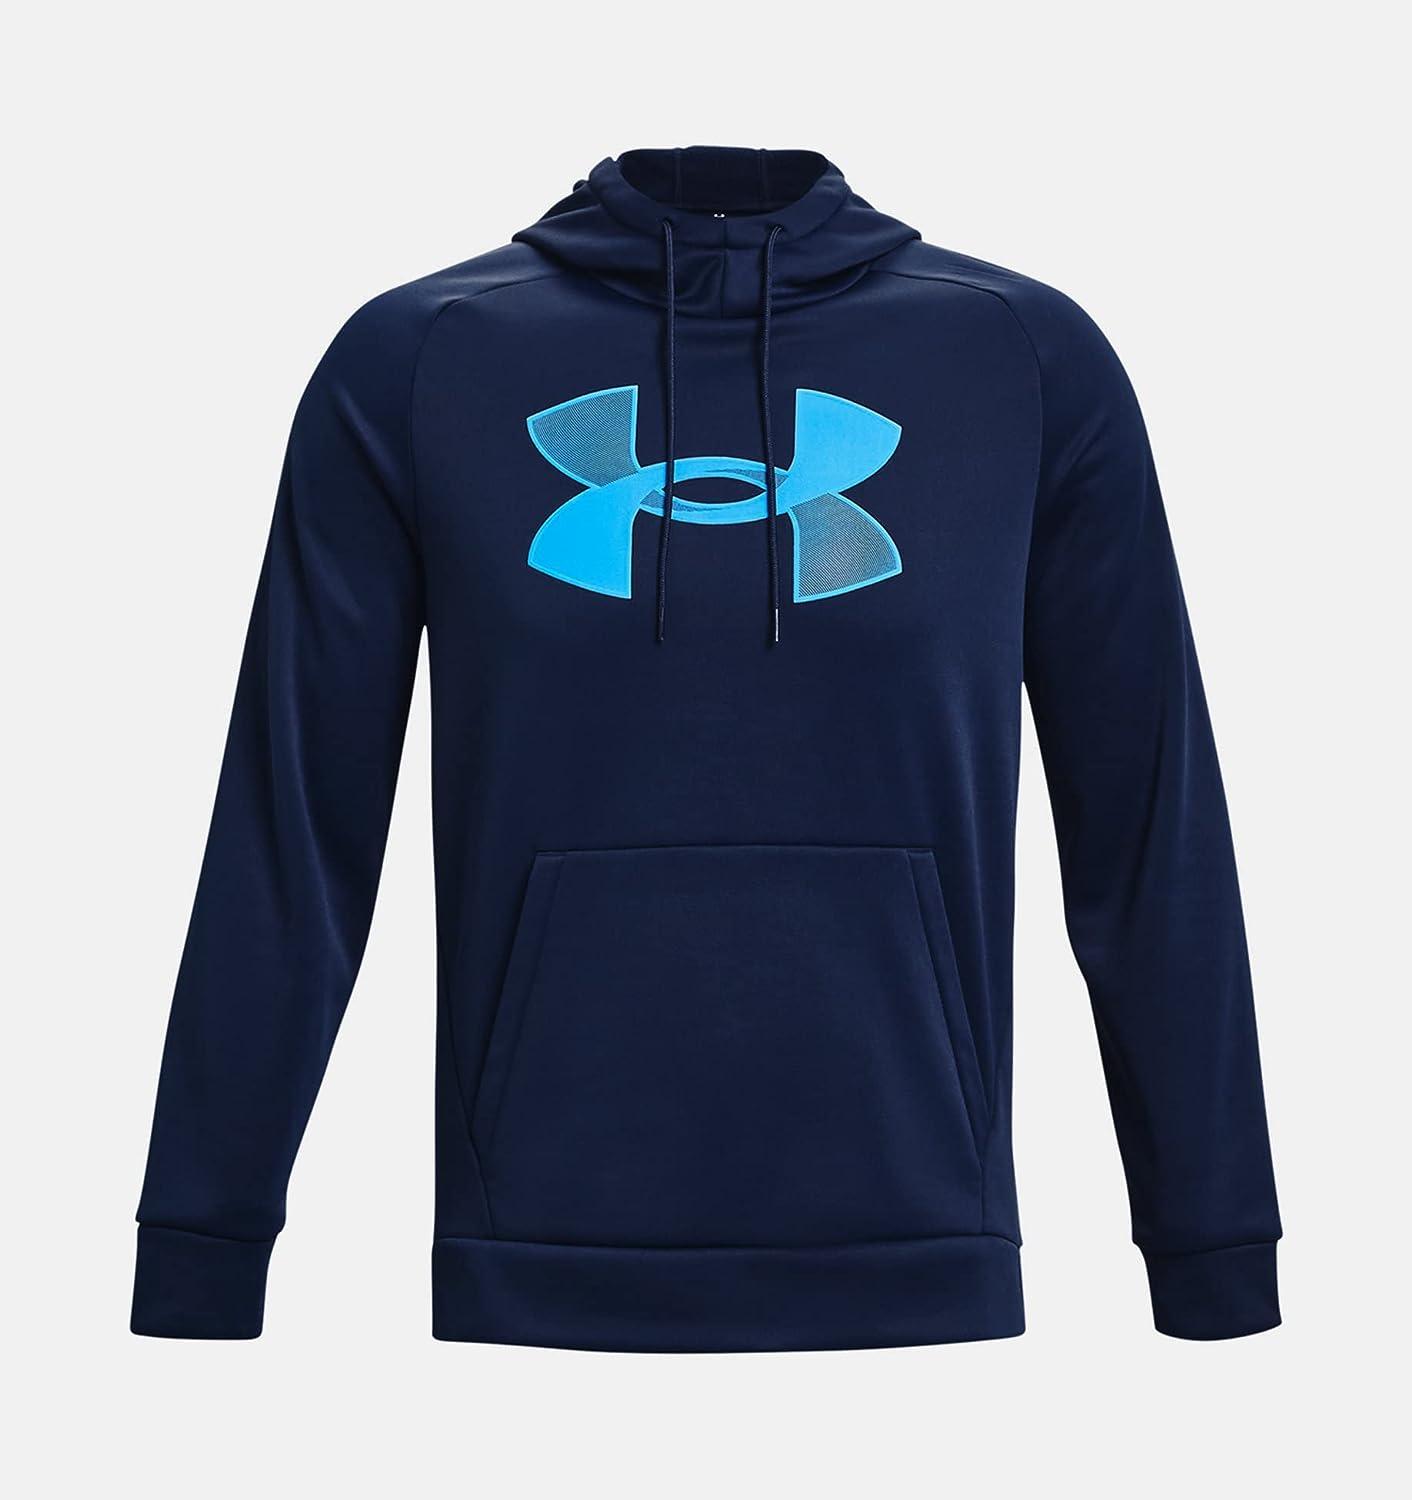 Vault – Pullover Hoodie - L00550 - Budget Promotion CA$ 0.00